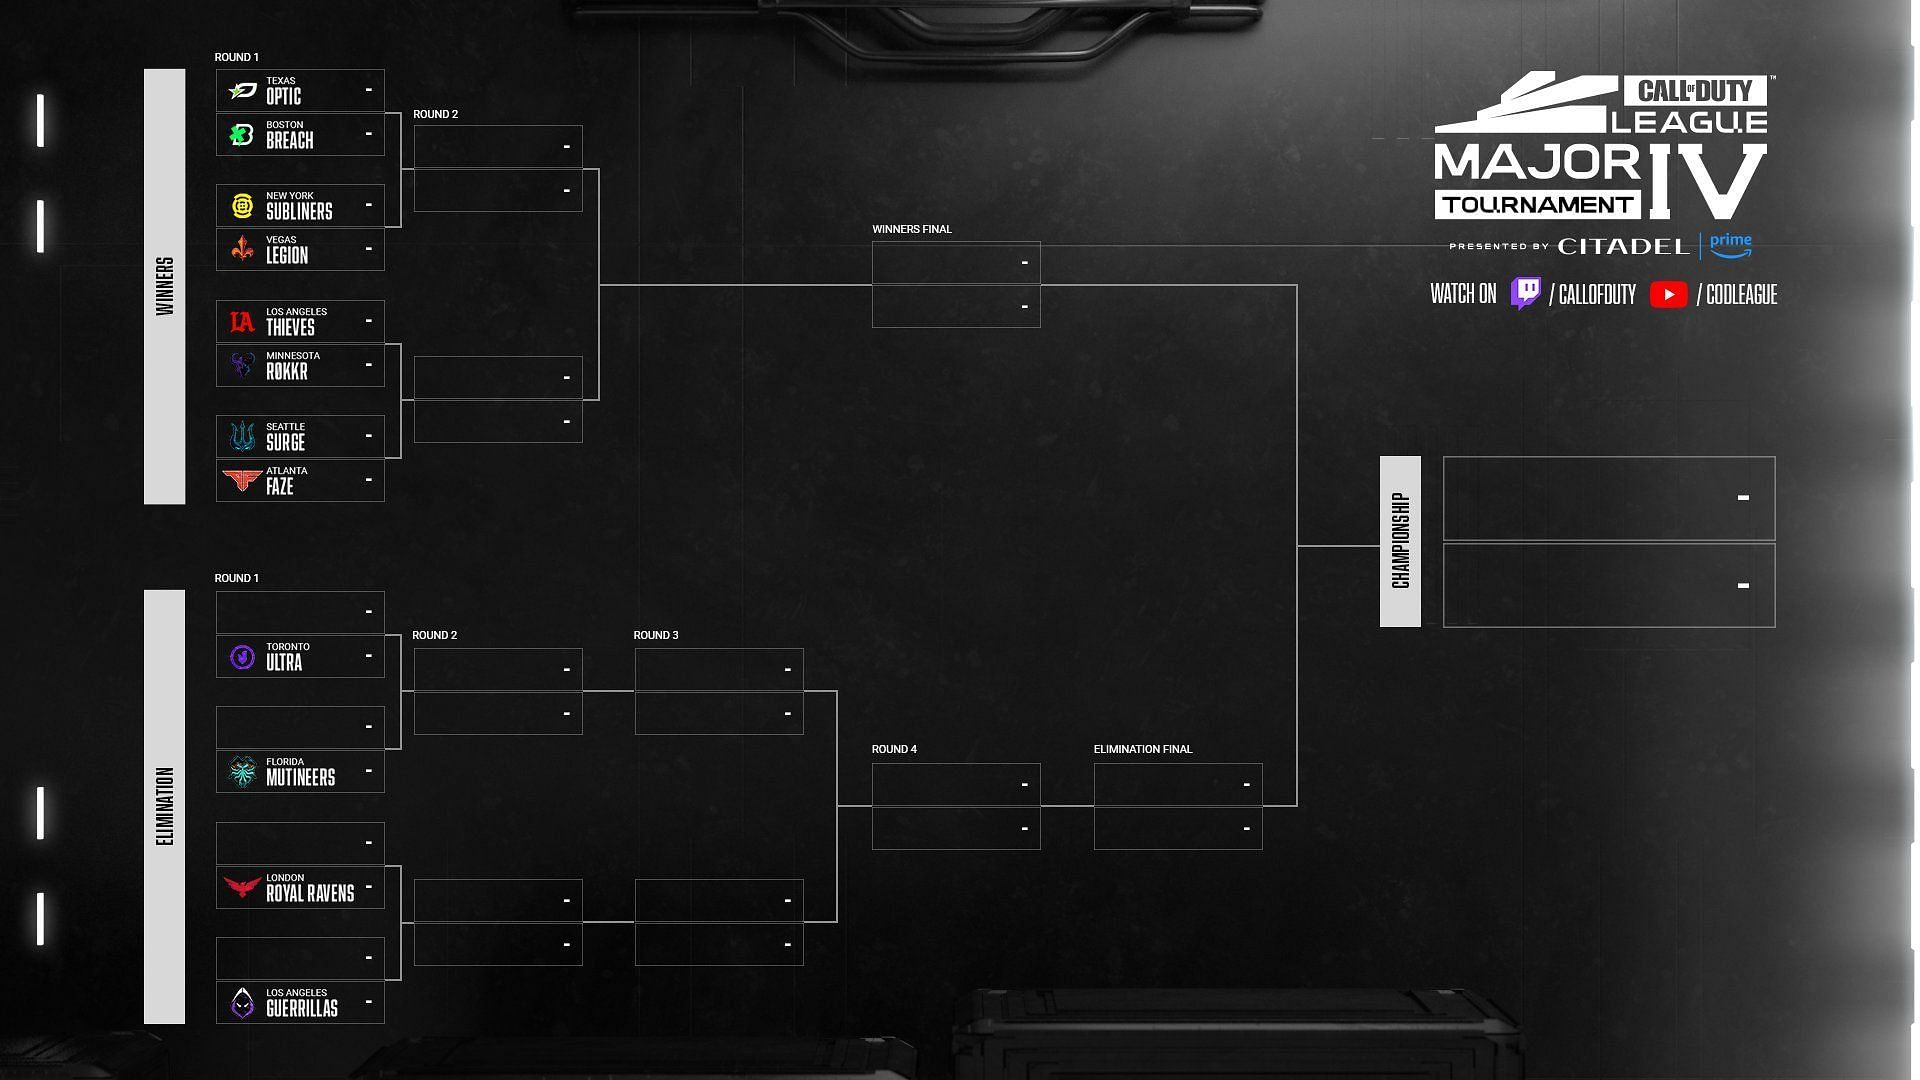 Call of Duty League Major IV Where to watch, bracket, schedules, and a